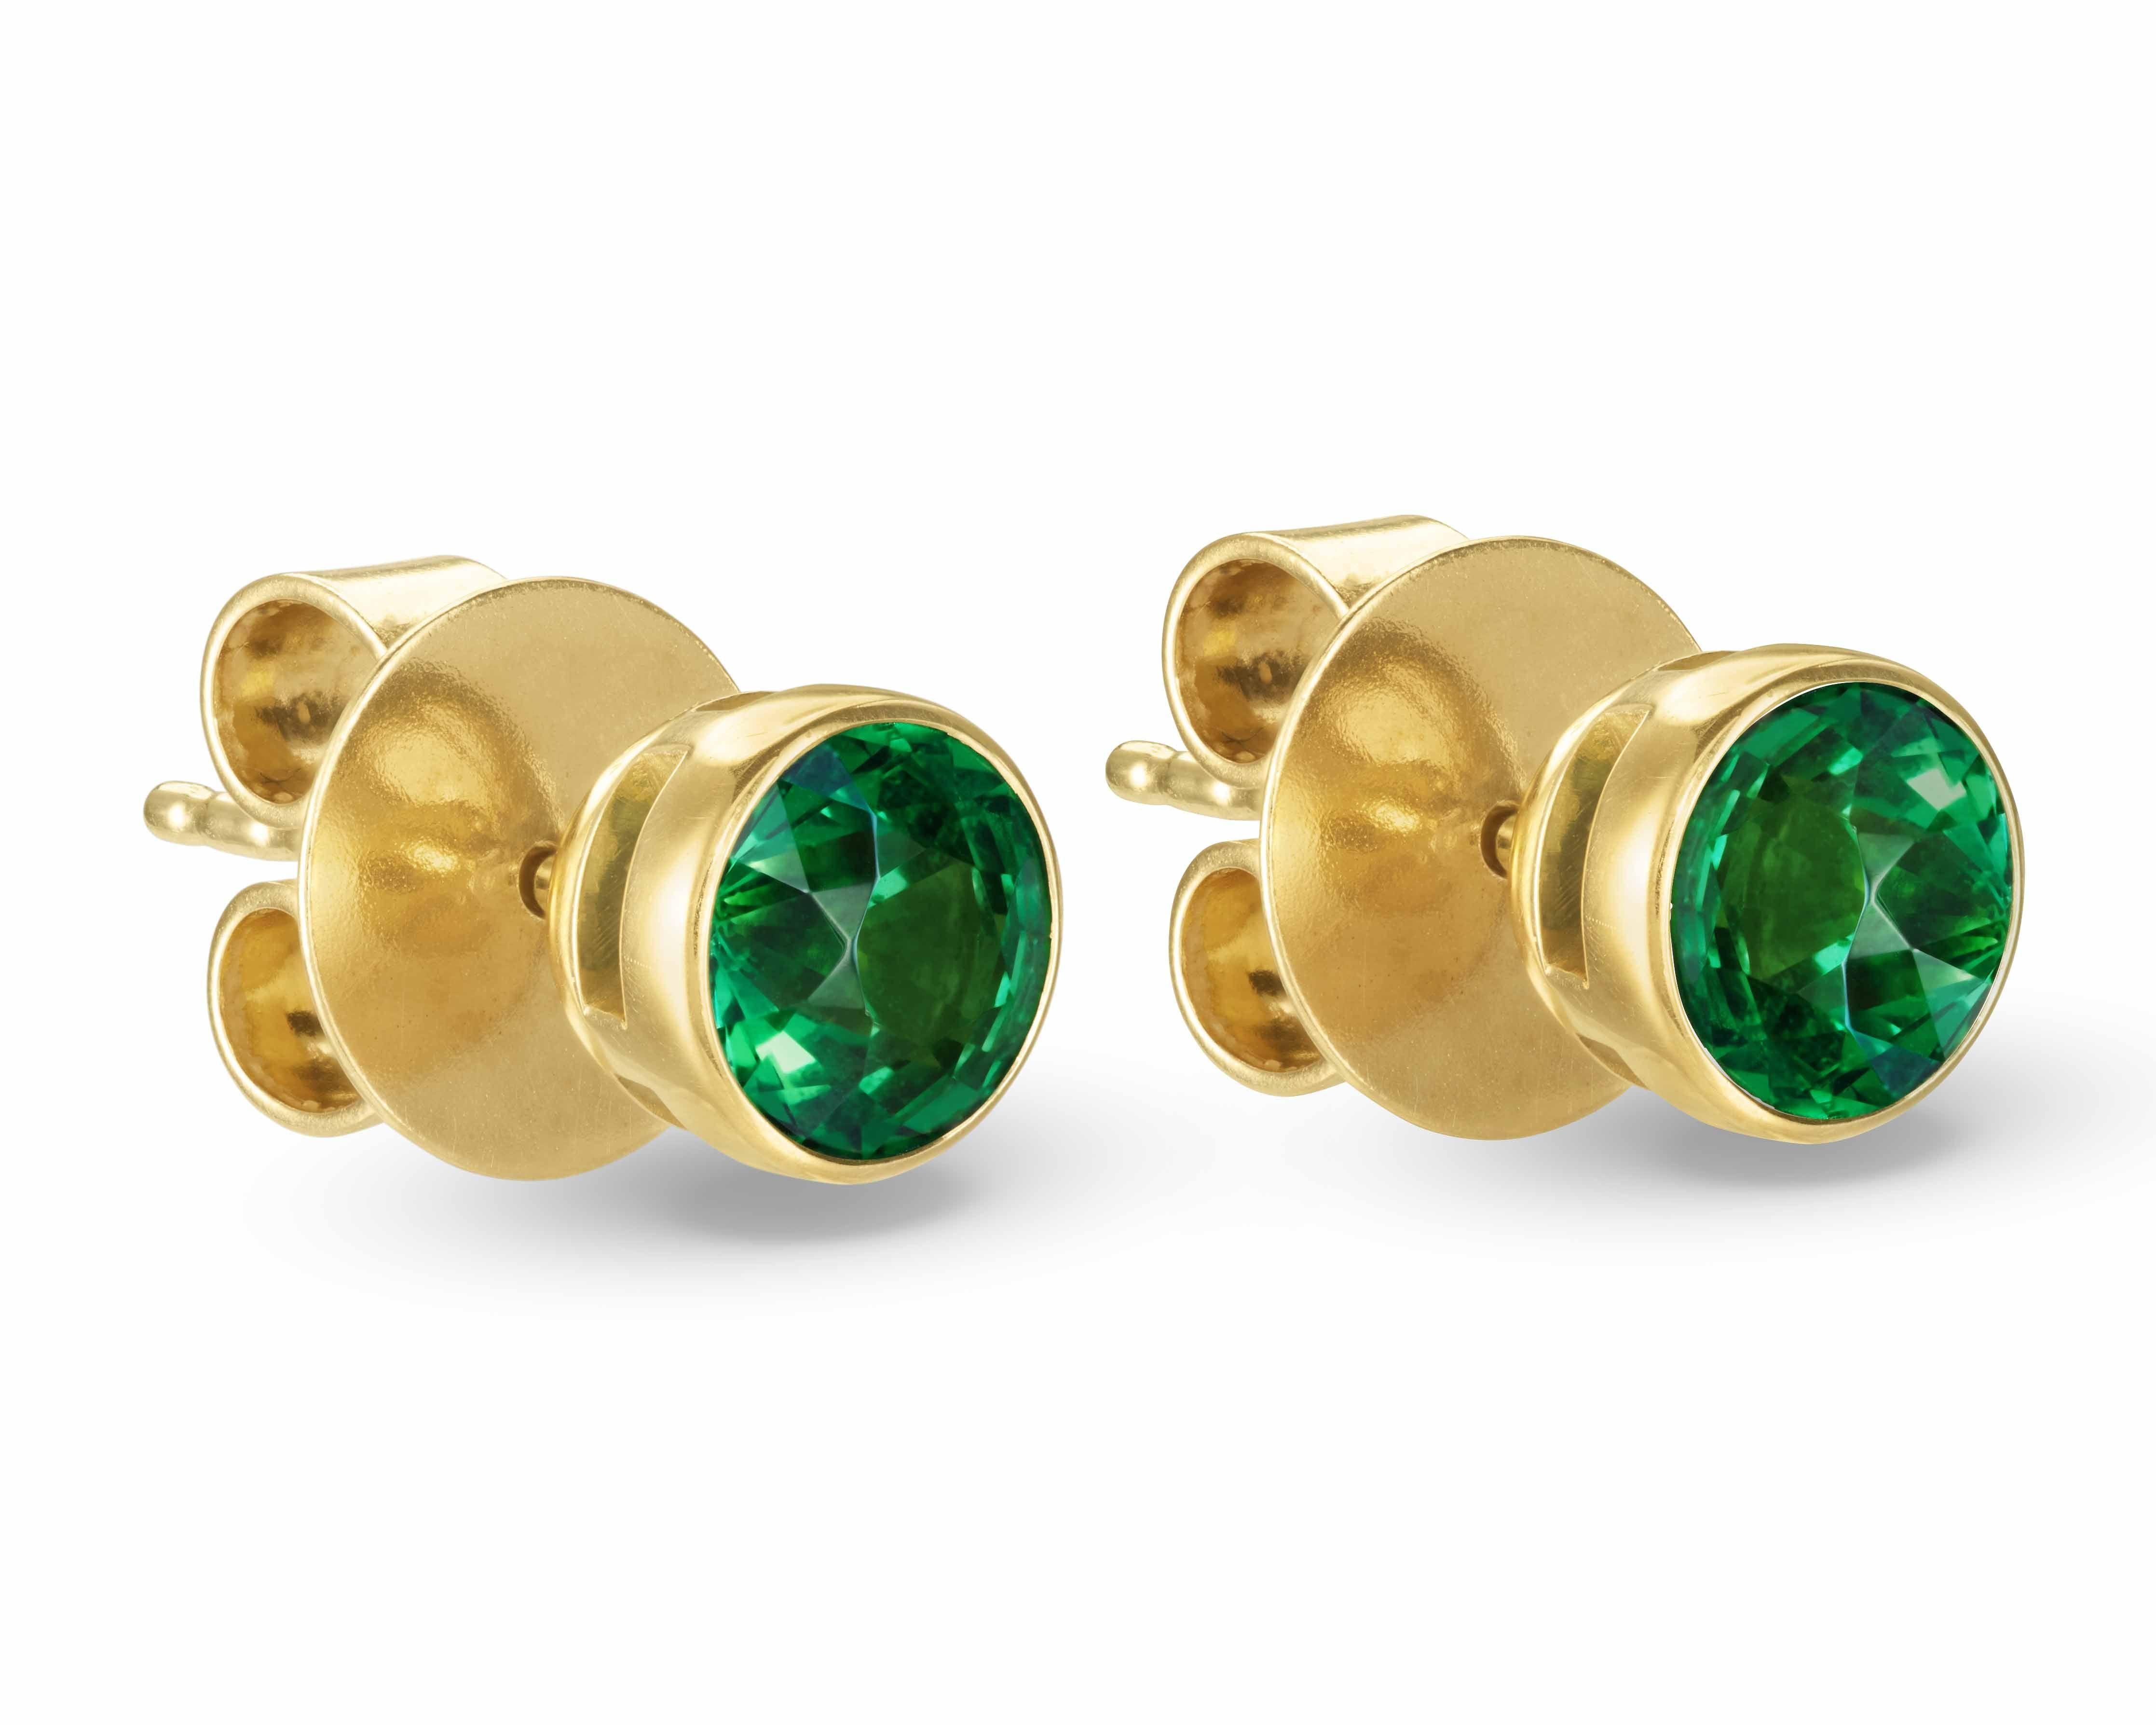 Classic and chic everyday studs. Each earring has a 1 carat vivid green round-cut Tsavorite bezel set in 18K yellow gold.

Total Tsavorite weight 2 carats.

SONYA K. is a New York City-based fine jewelry brand that creates wearable, stone-centric,